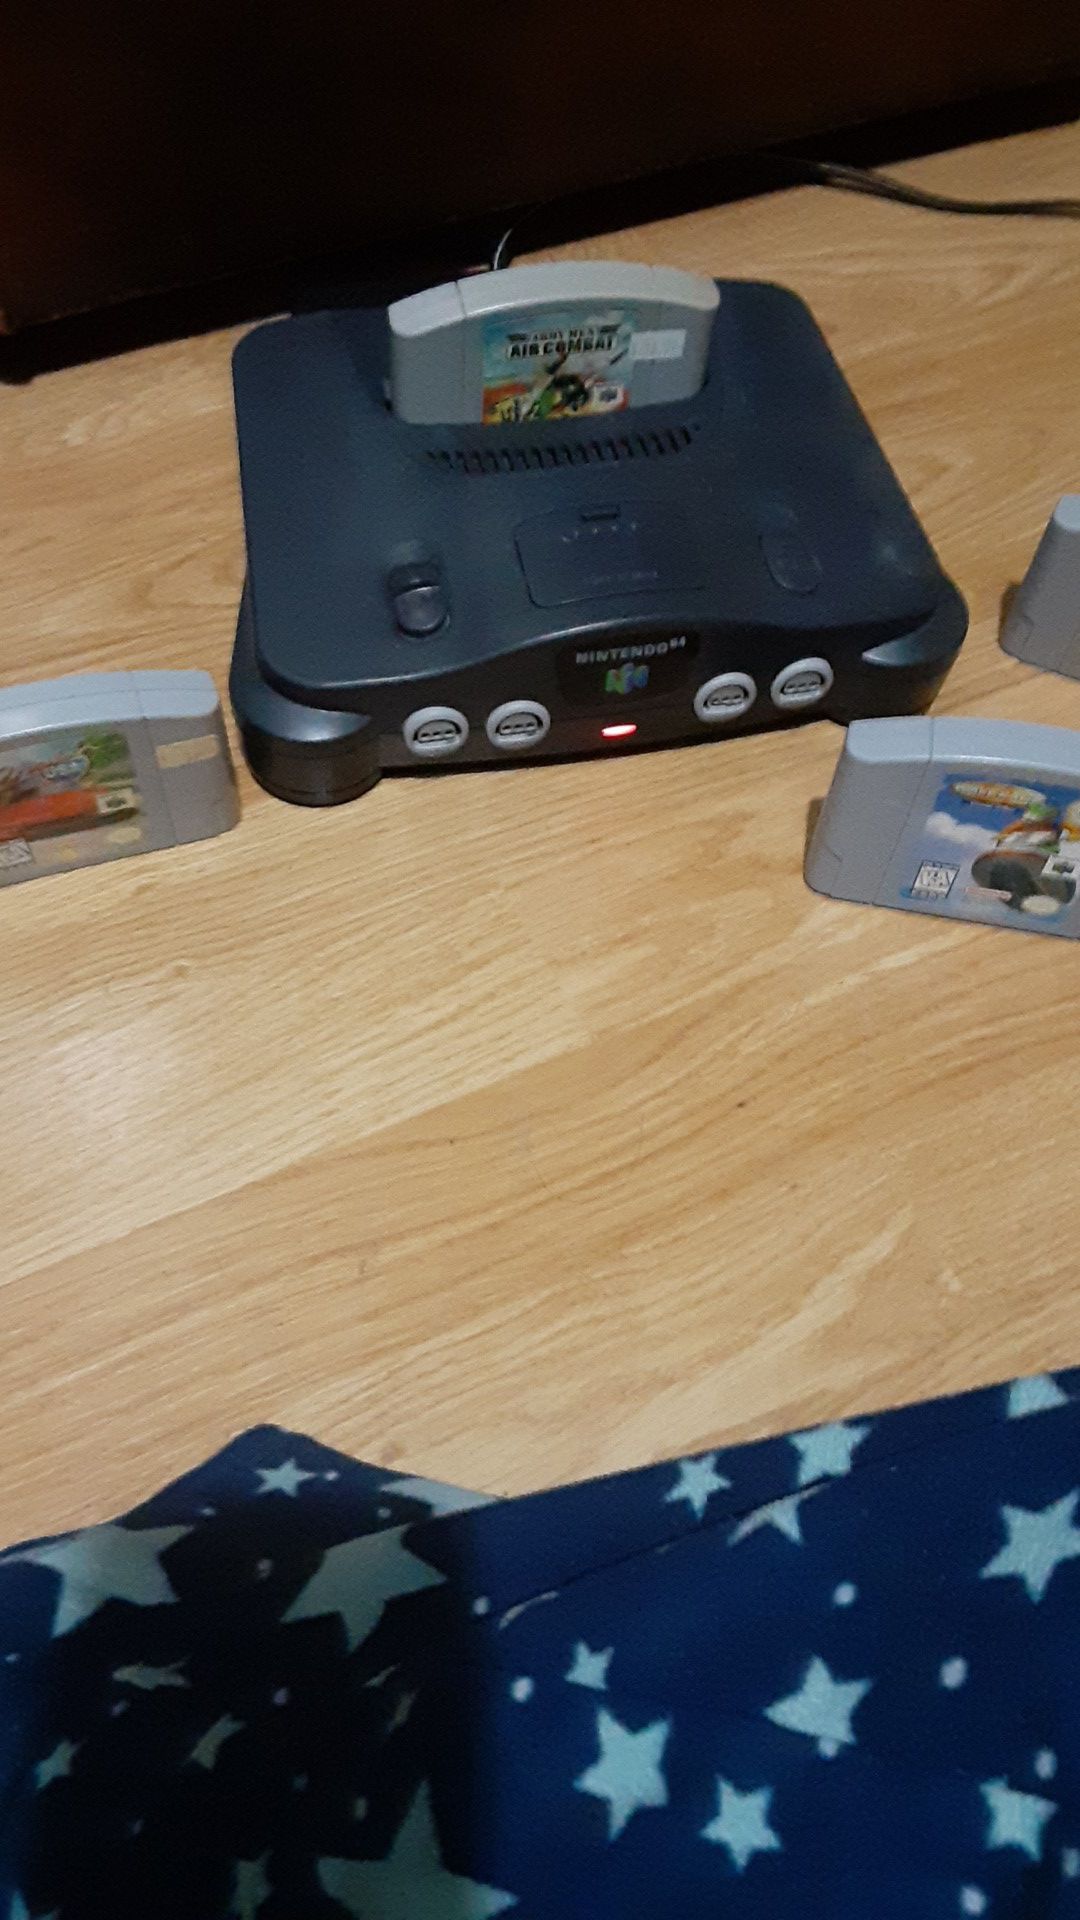 Nintendo 64 and 4 games for $60 since I don't have the remotes